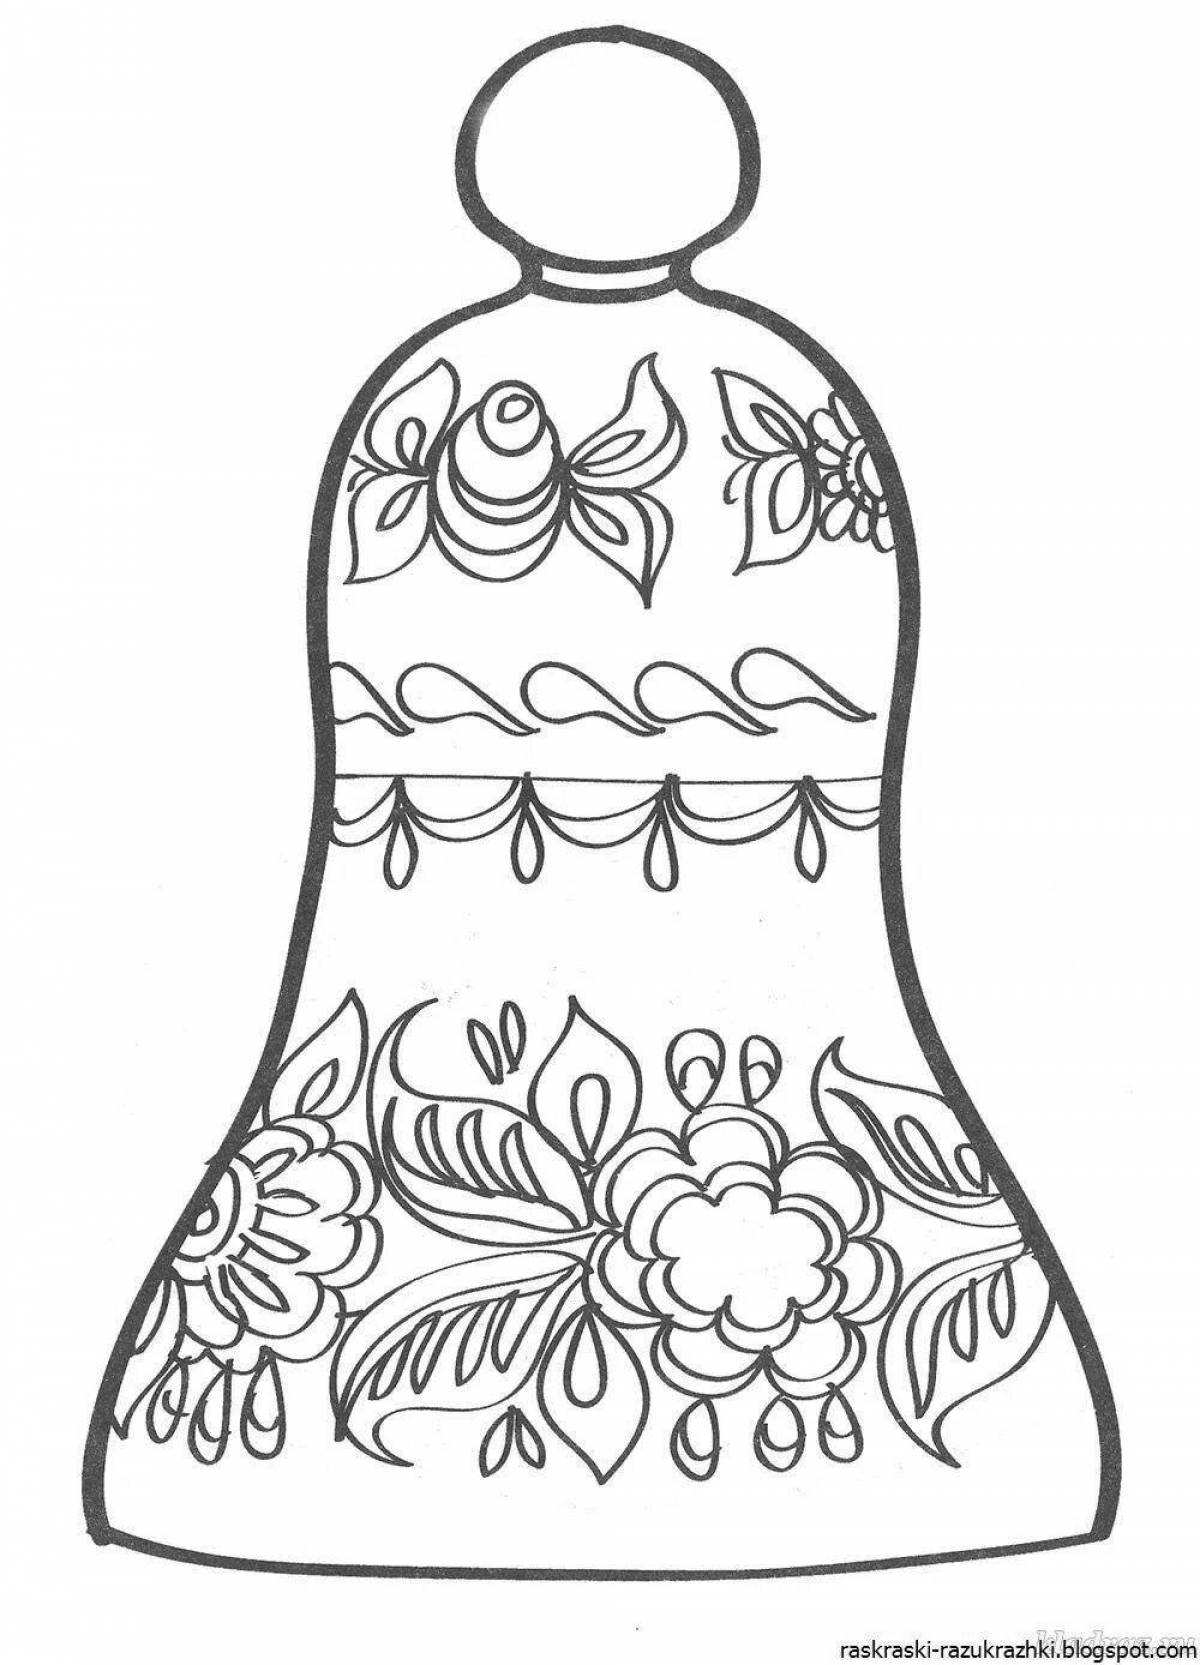 Delightful Gorodets toy coloring book